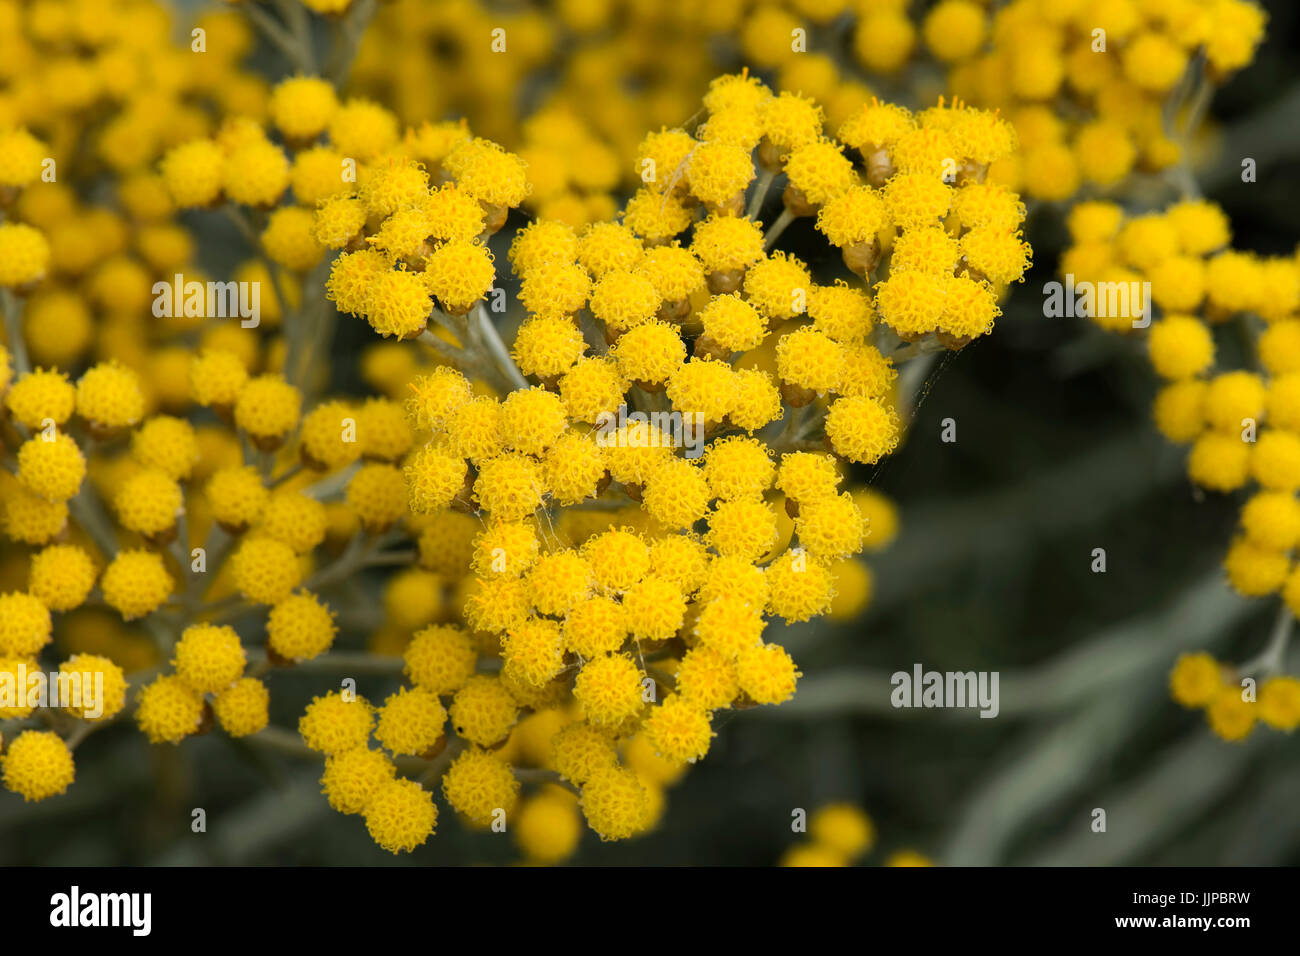 Small individual flowers on the inflorescence of a yellow curry plant, Helichrysum italicum, a strongly pungent garden rockery plant, July Stock Photo